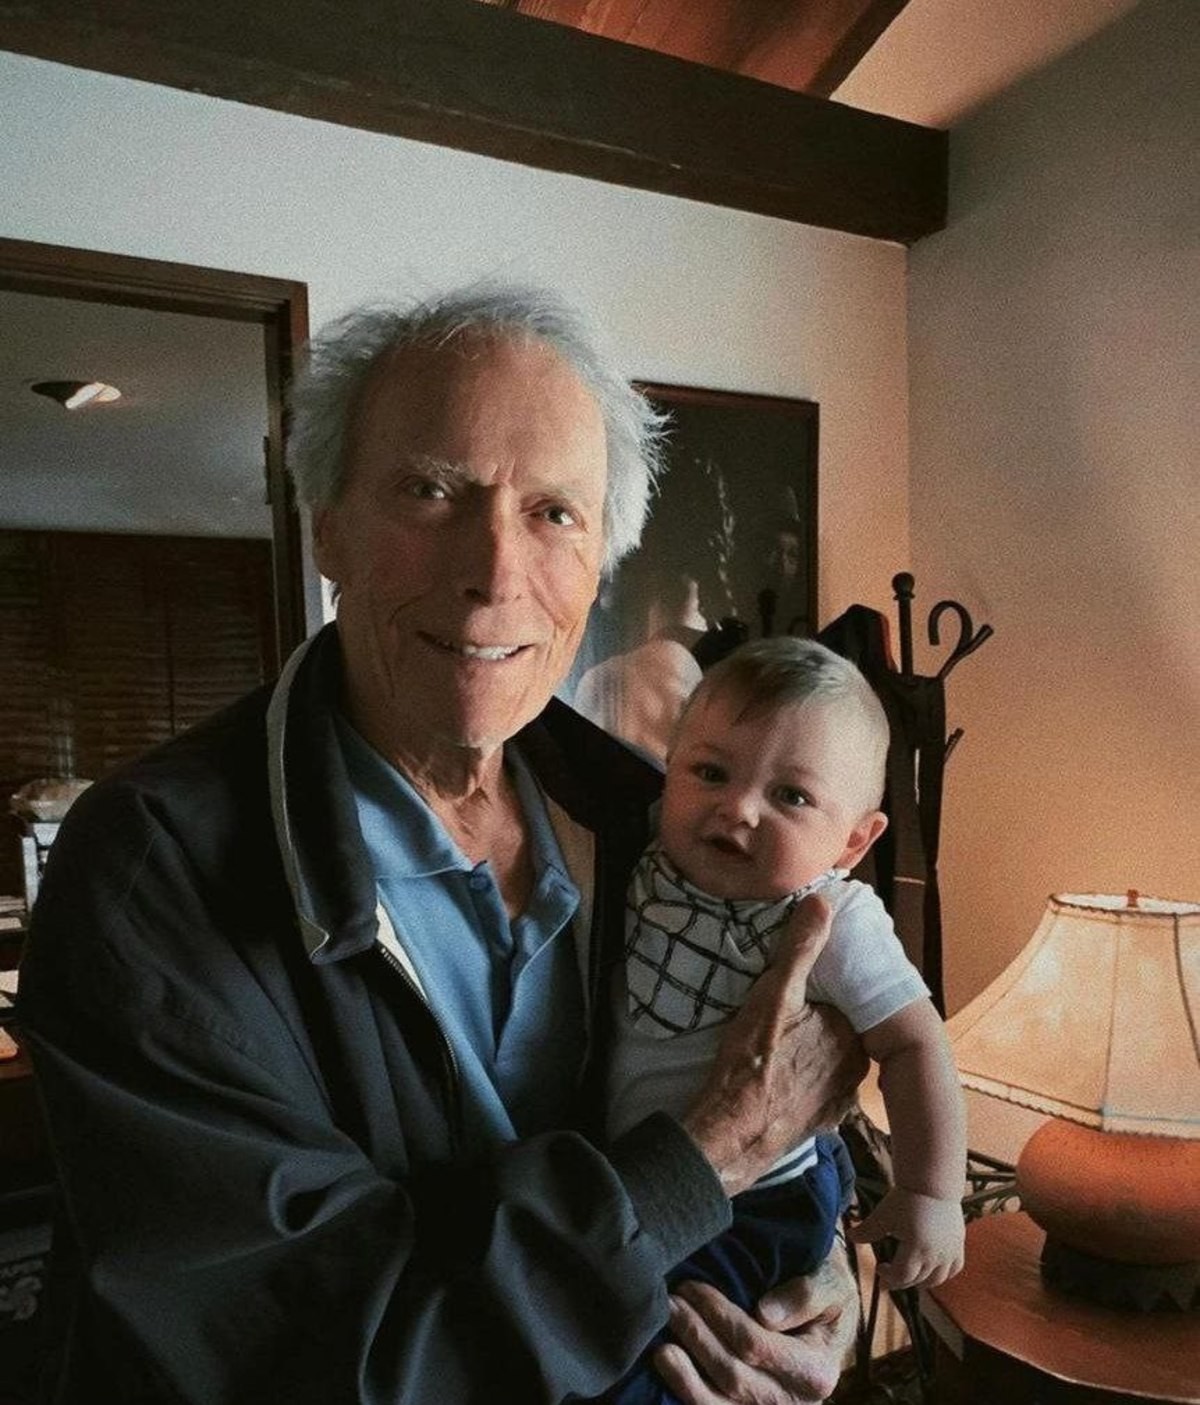 Grandpa and nephew. Clint Eastwood and his grandson, 2021... That's a wierd name for a baby.